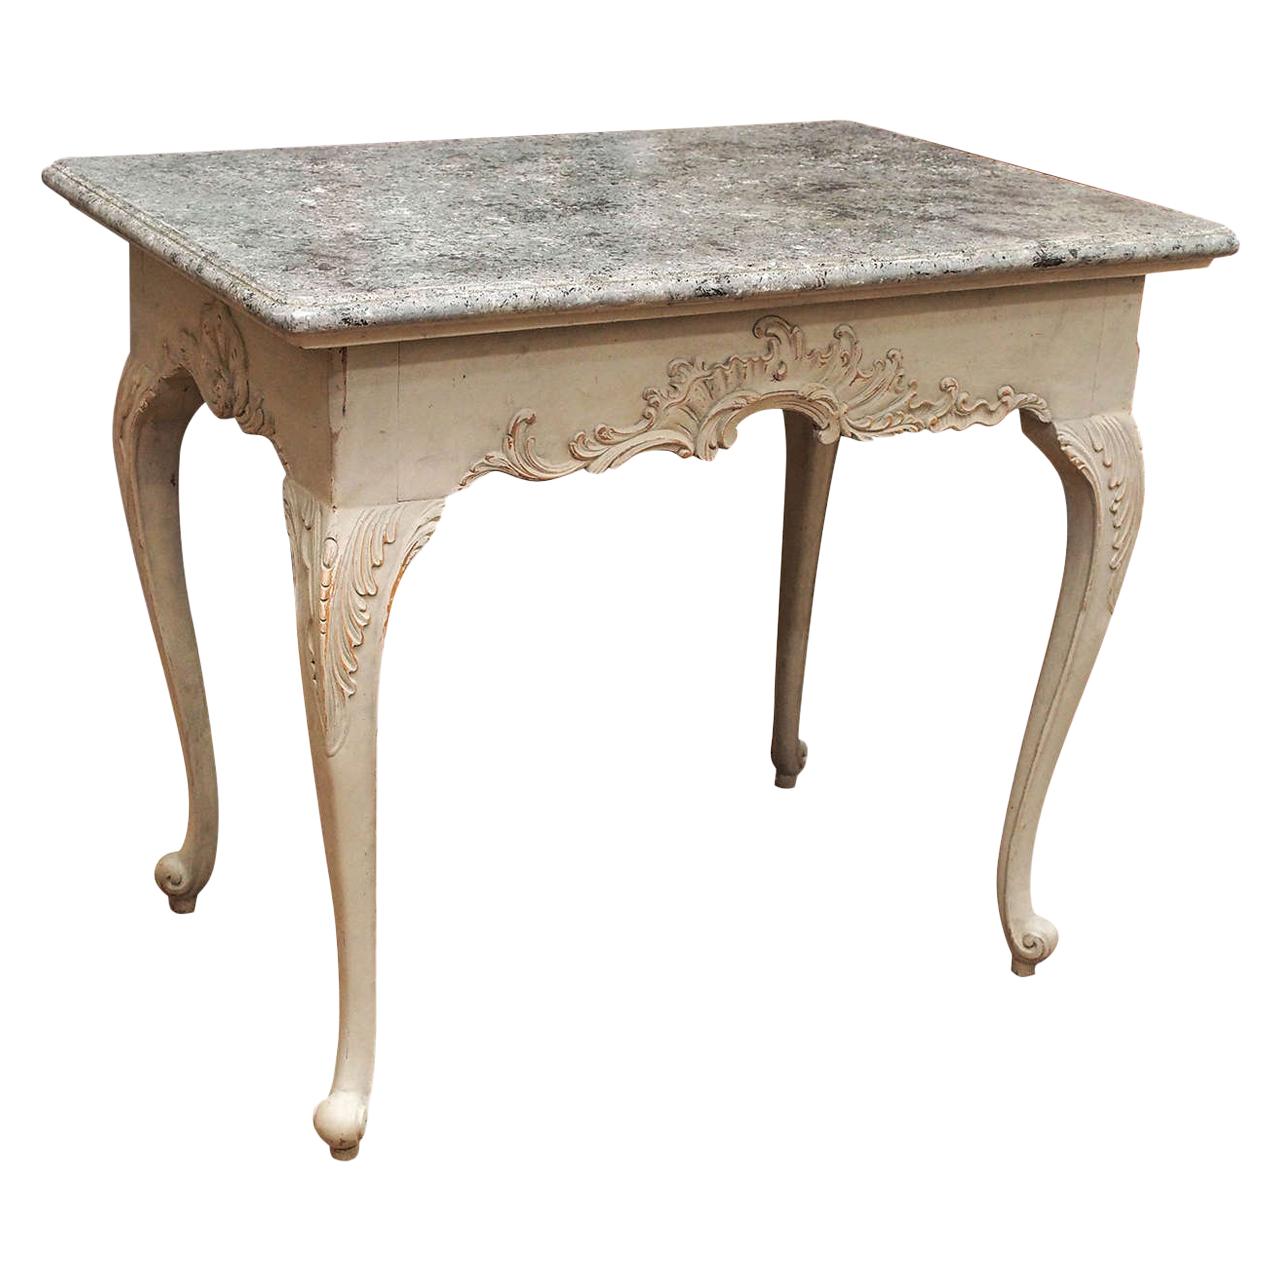 Gustavian Period Table with Faux Marble-Top, 18th Century